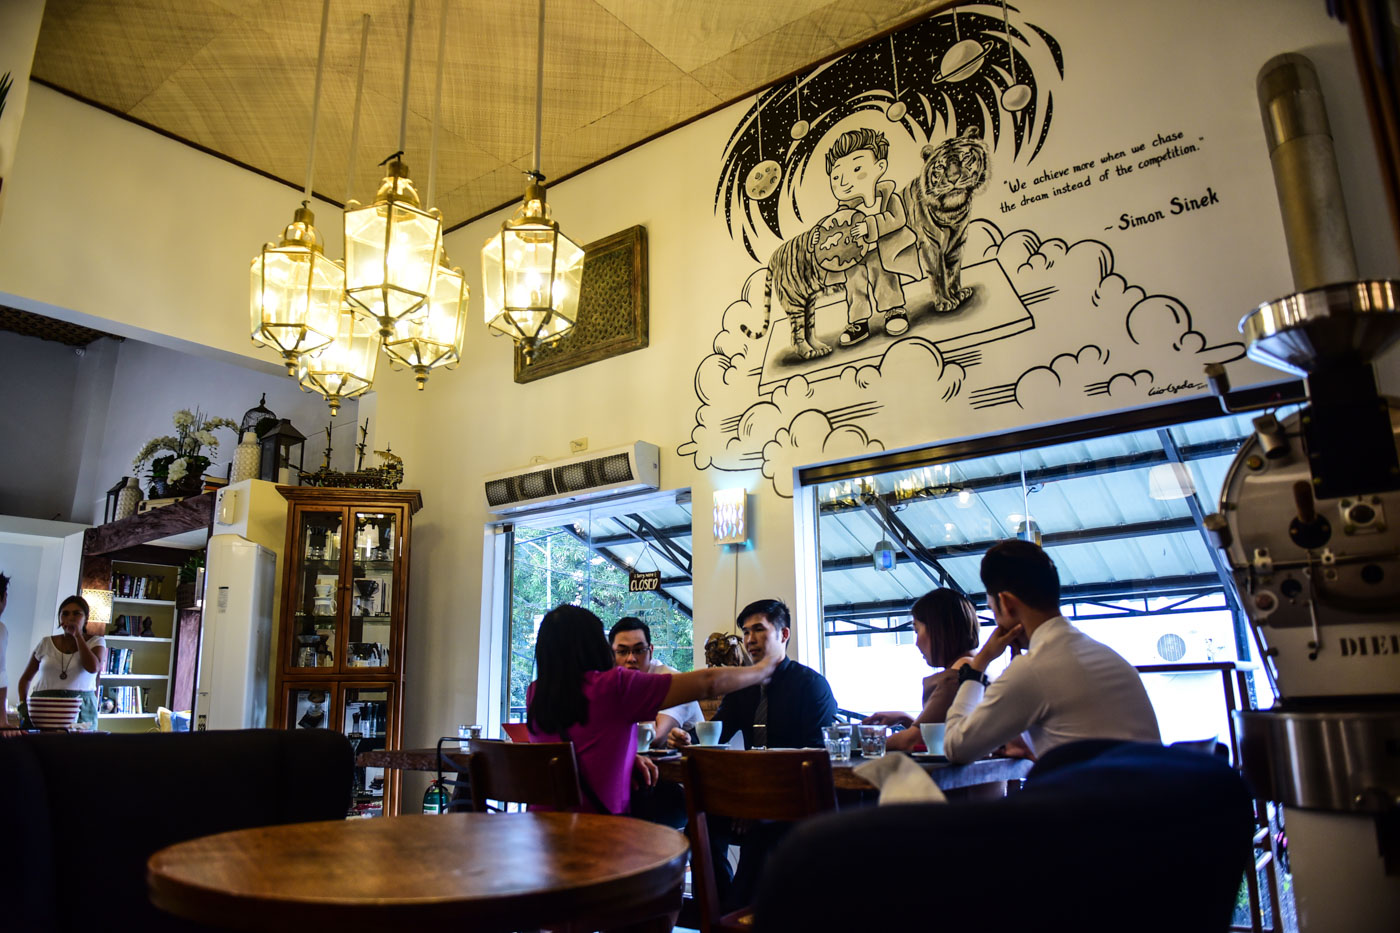 PINOY PRIDE. From the menu to the interiors, every bit of the Giving Cafe shows off Filipino talent and workmanship. Photo by Alecs Ongcal/Rappler